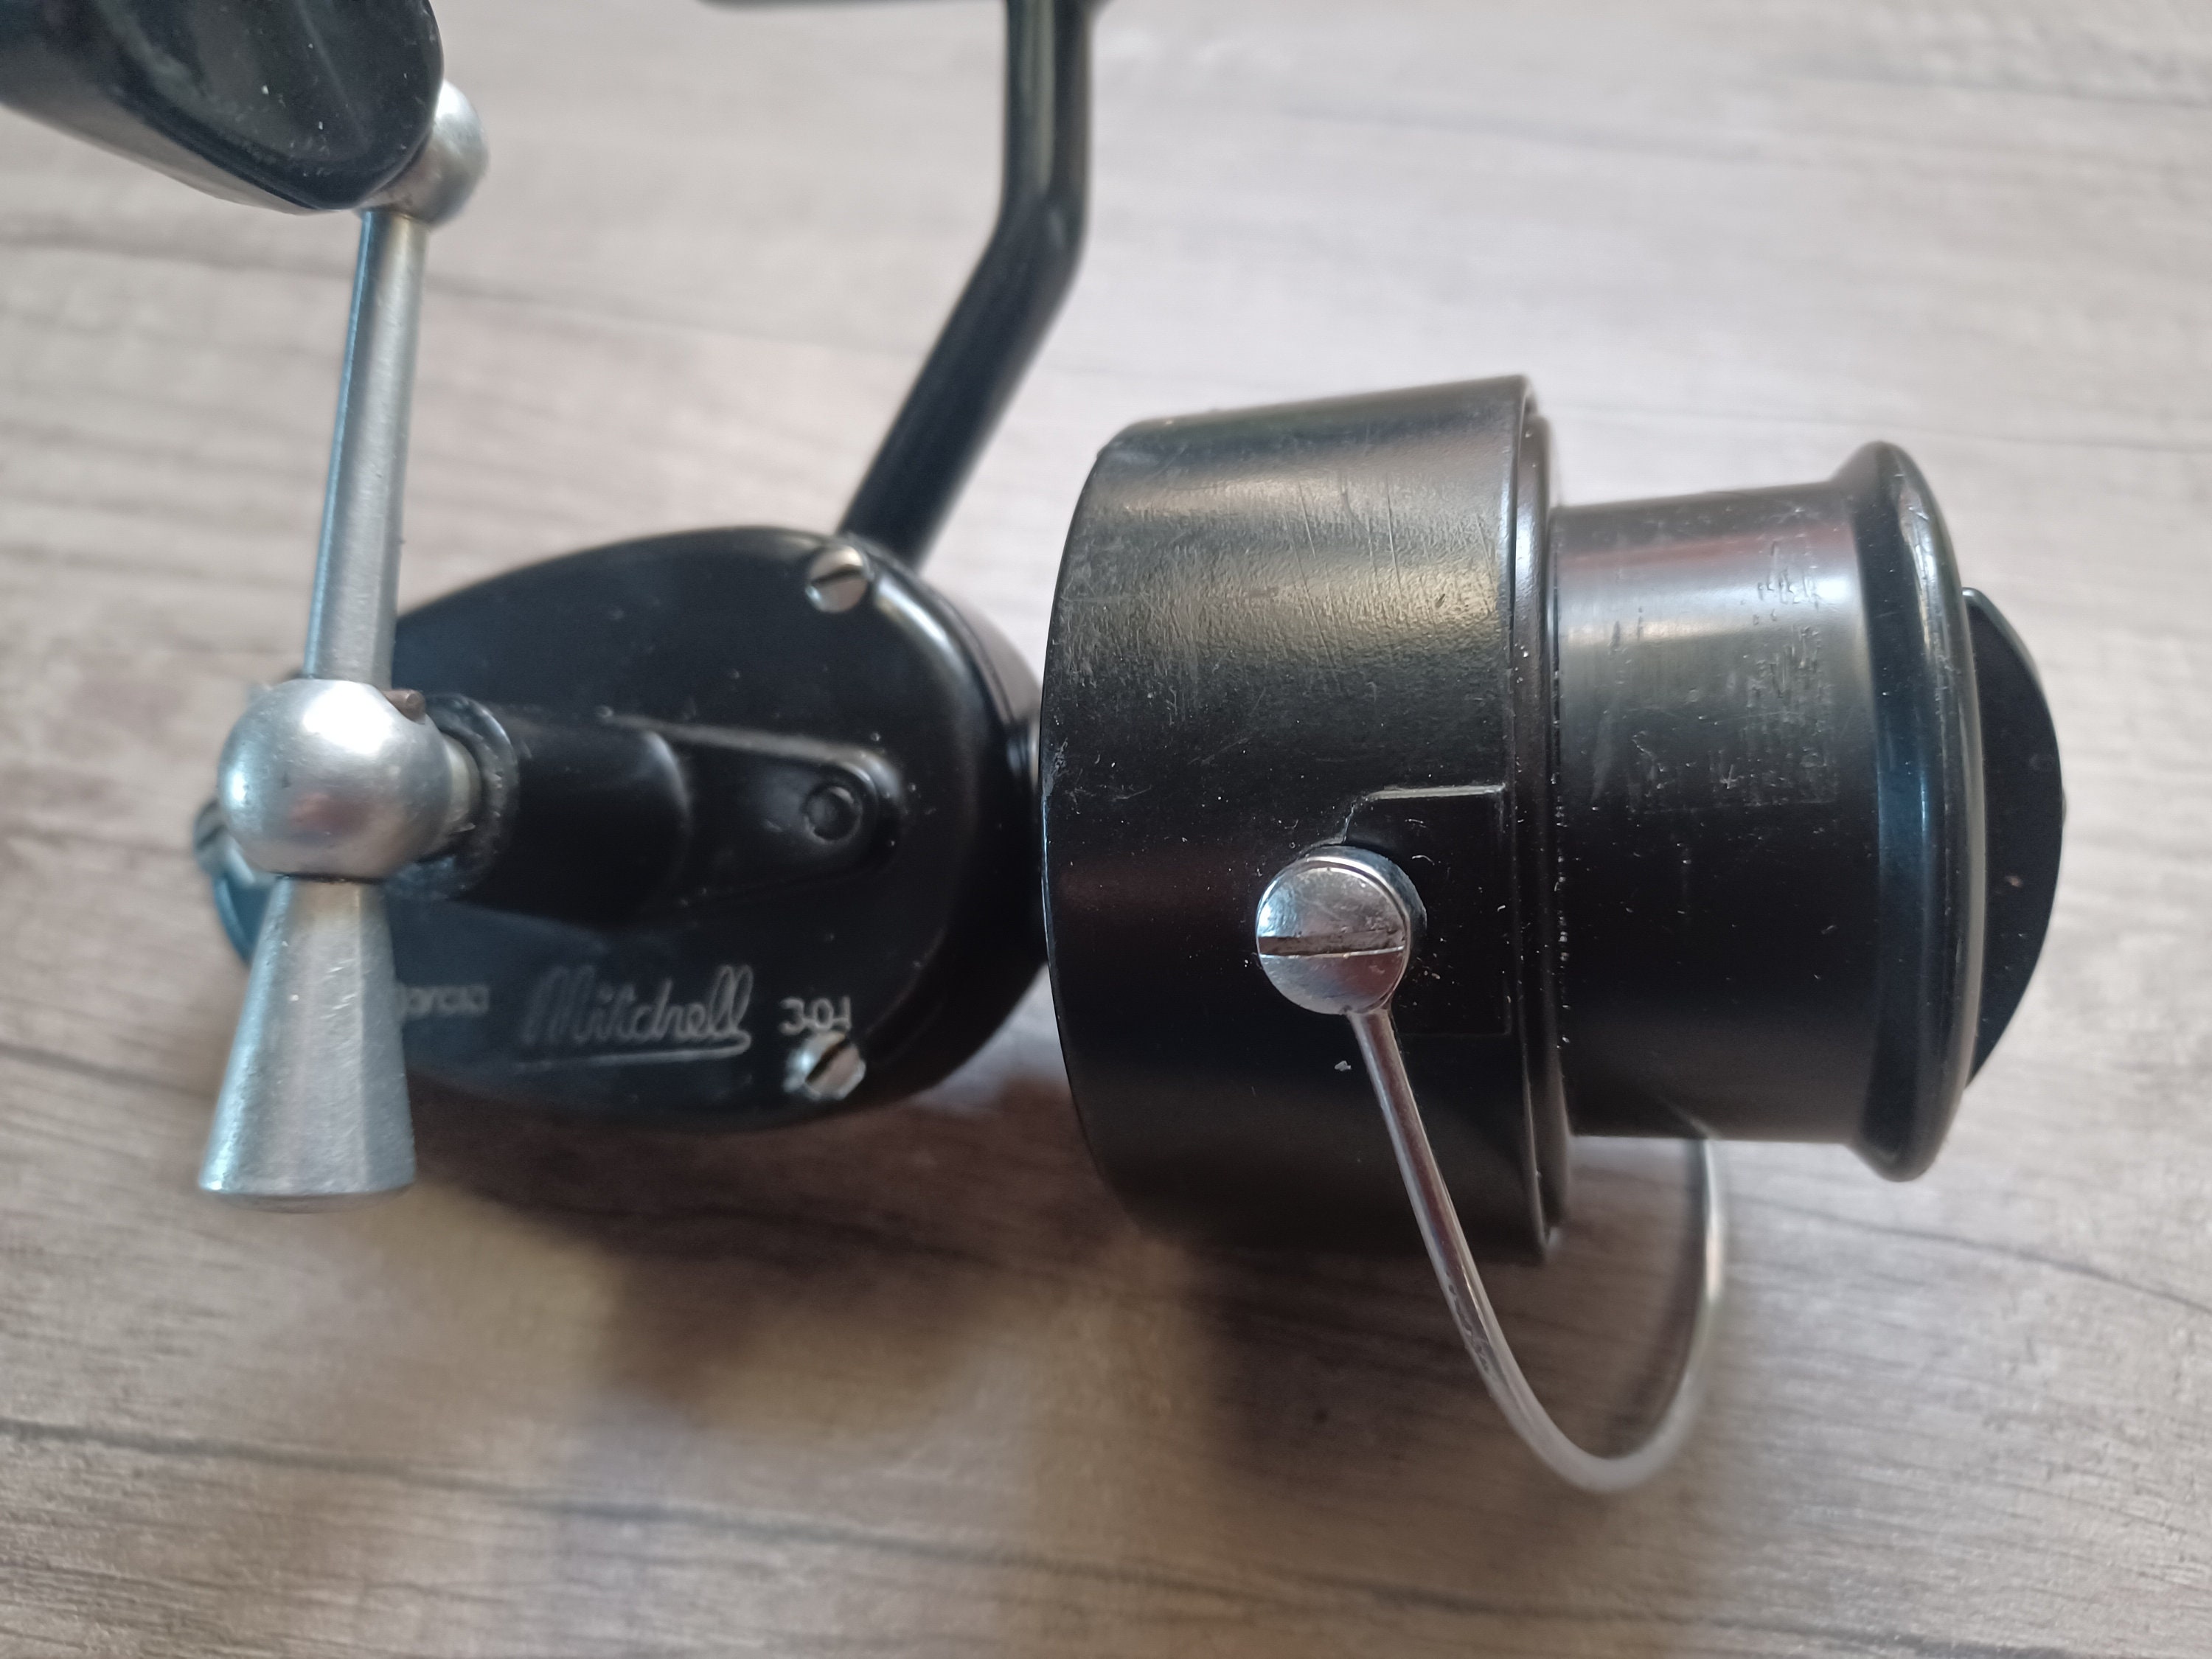 An Excellent Vintage Mitchell 301 Fixed Spool Spinning Reel for the Lefty.  Dated 1966. Super Smooth. -  Canada